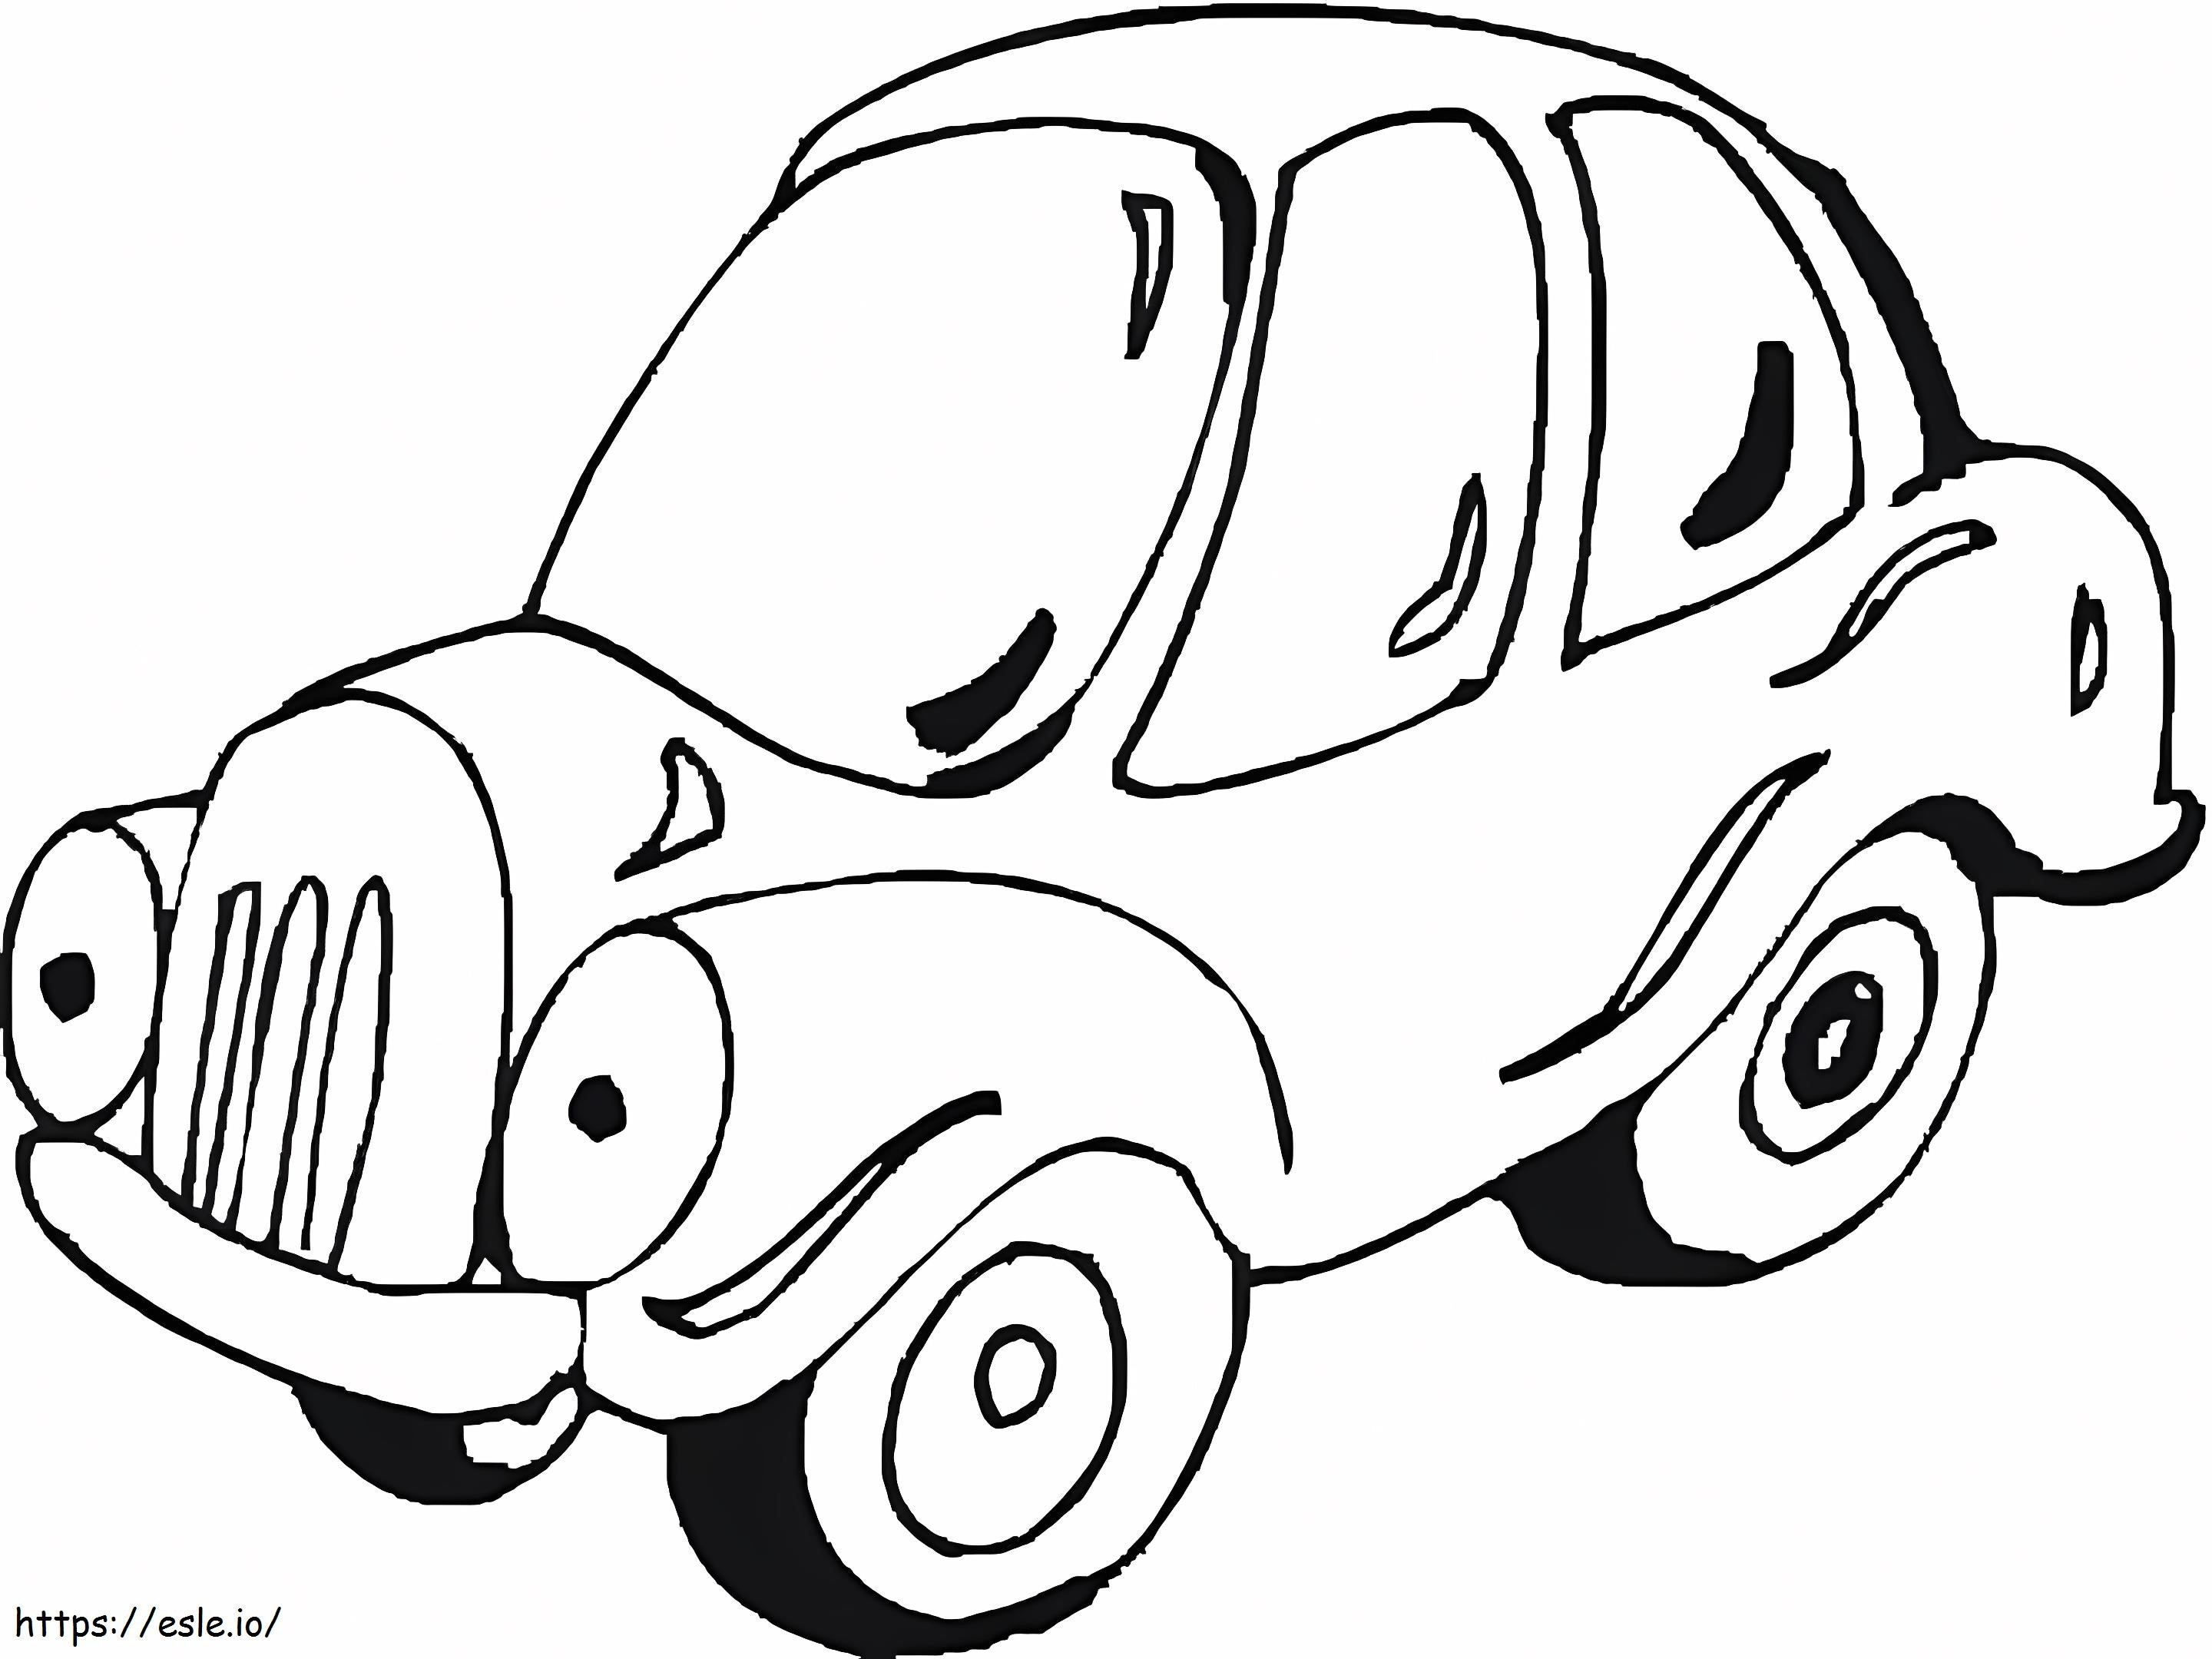 Funny Car coloring page